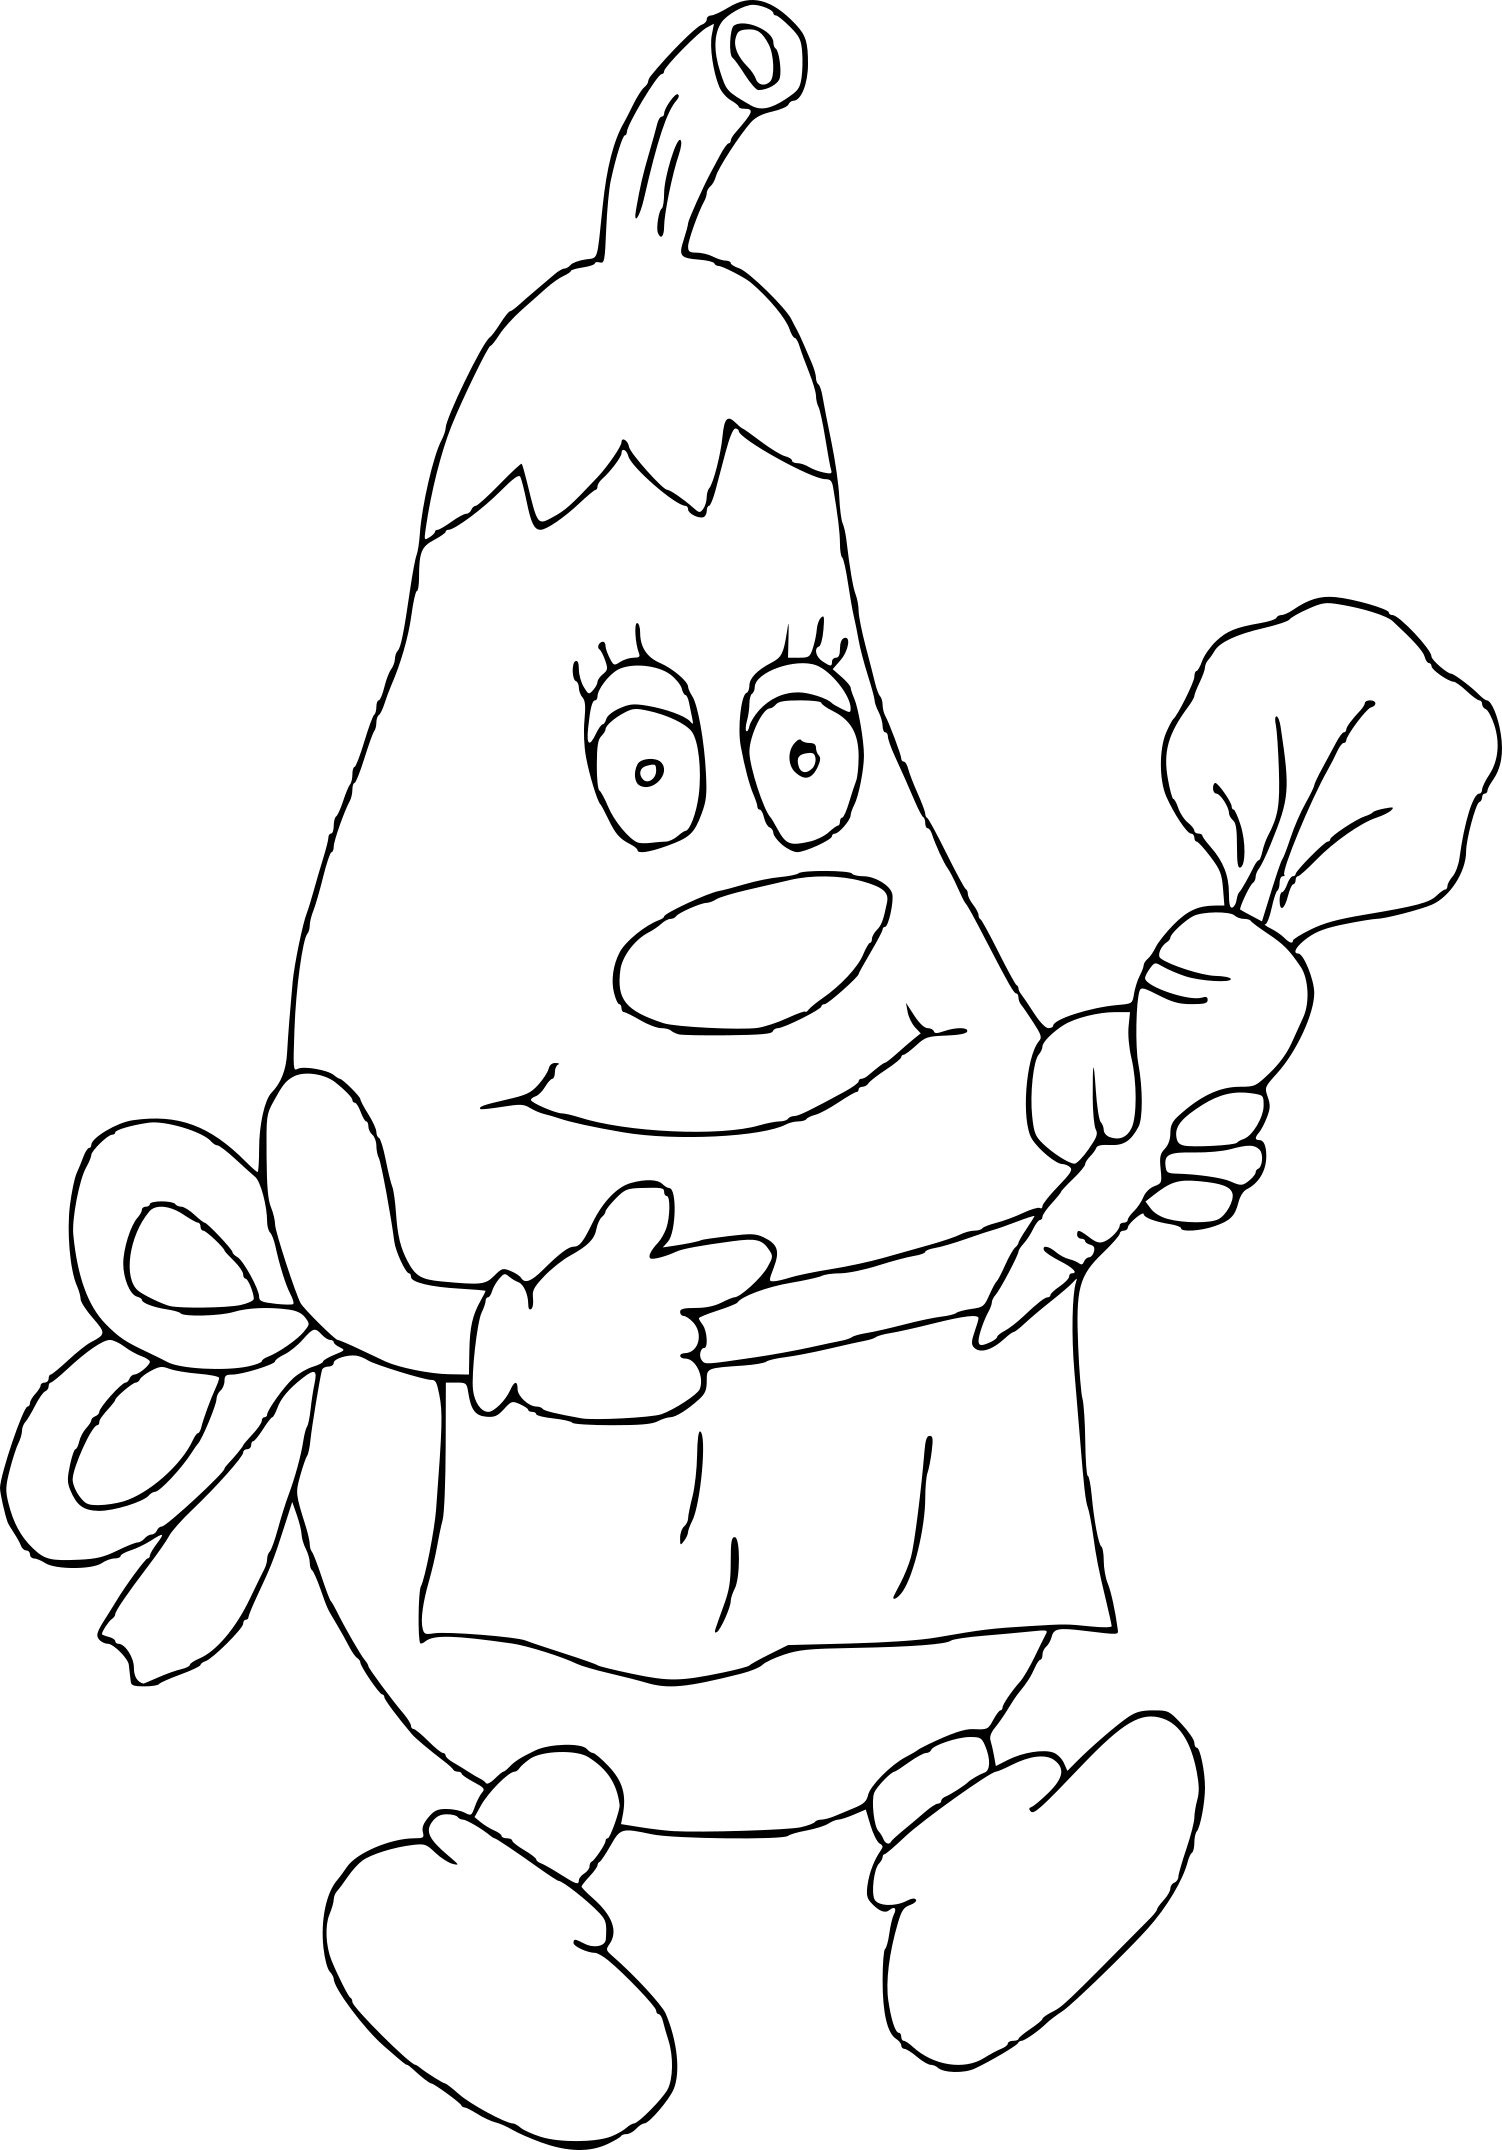 Funny Fruit coloring page